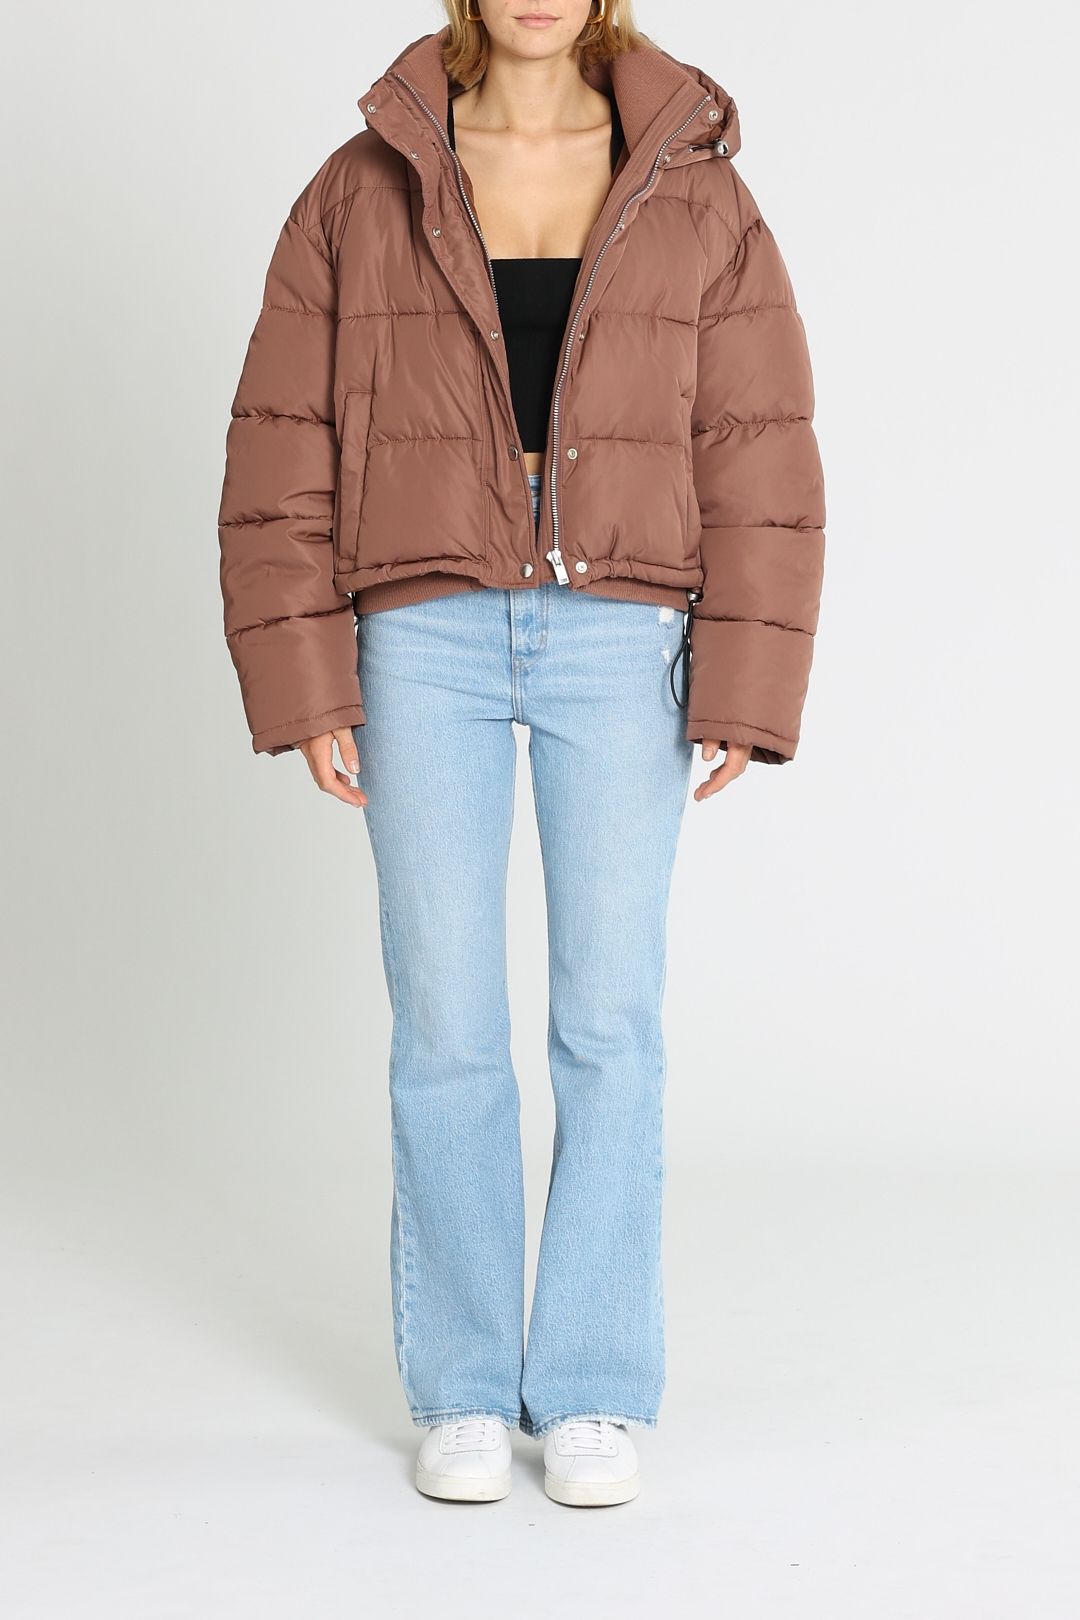 Ena Pelly Isla Cropped Puffer Jacket Coco